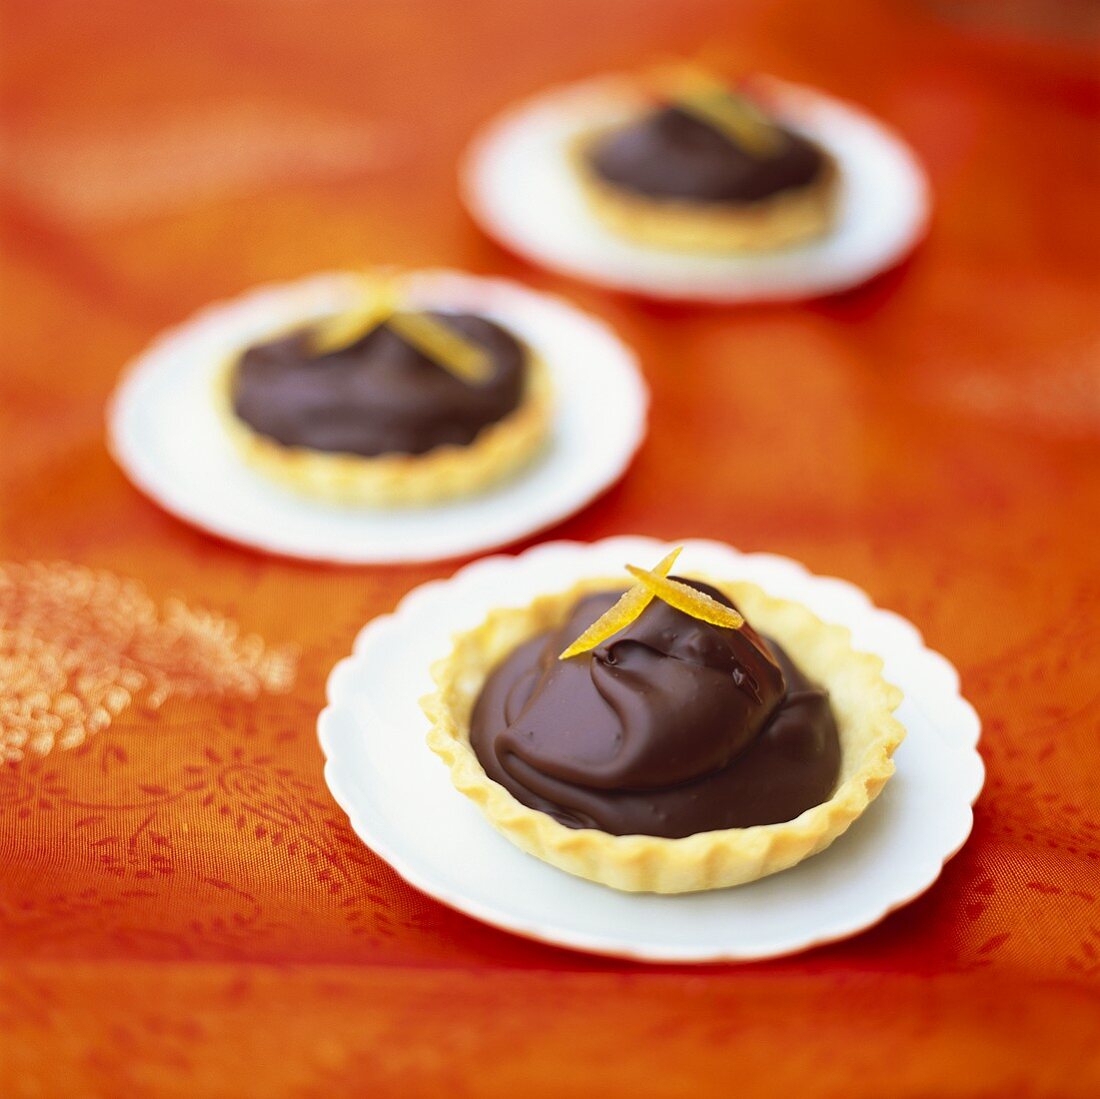 Tartlets with chocolate cream and candied oranges